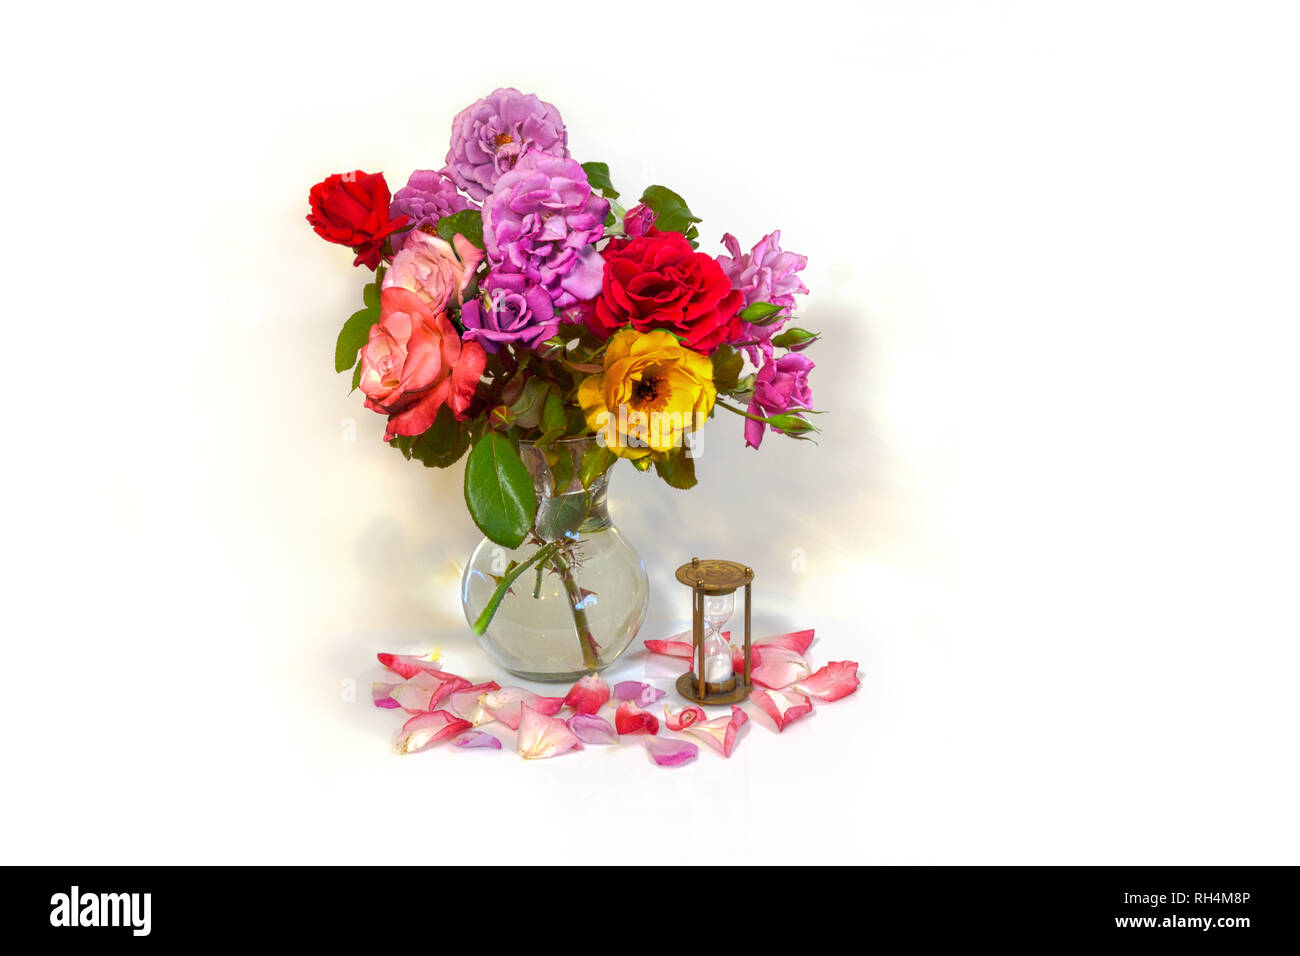 Death anniversary Cut Out Stock Images & Pictures - Alamy